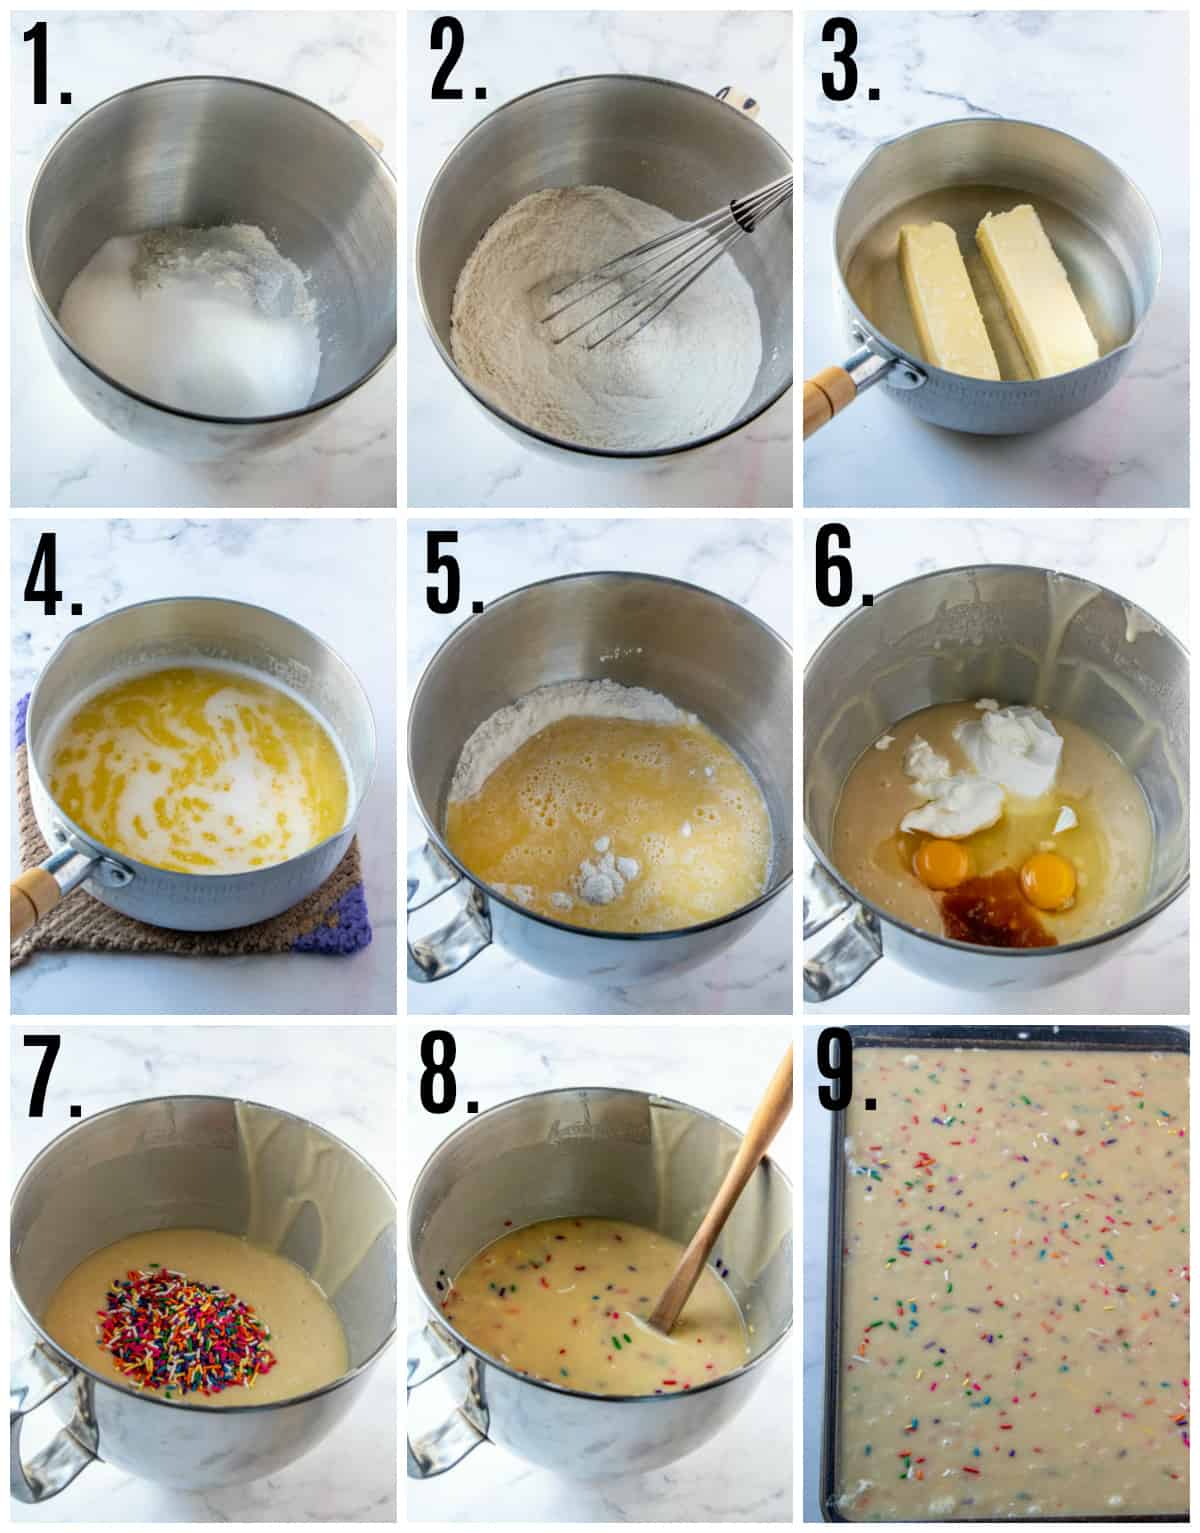 Step by step photos on how to make Funfetti cake